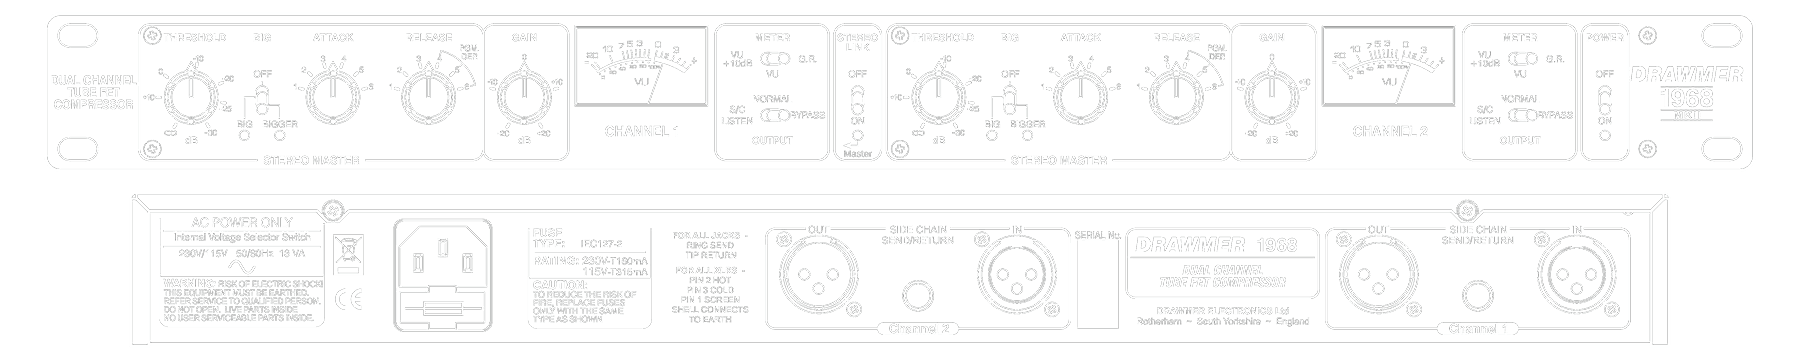 A line drawing of the front and rear panels of the 1968 showing controls and connectors